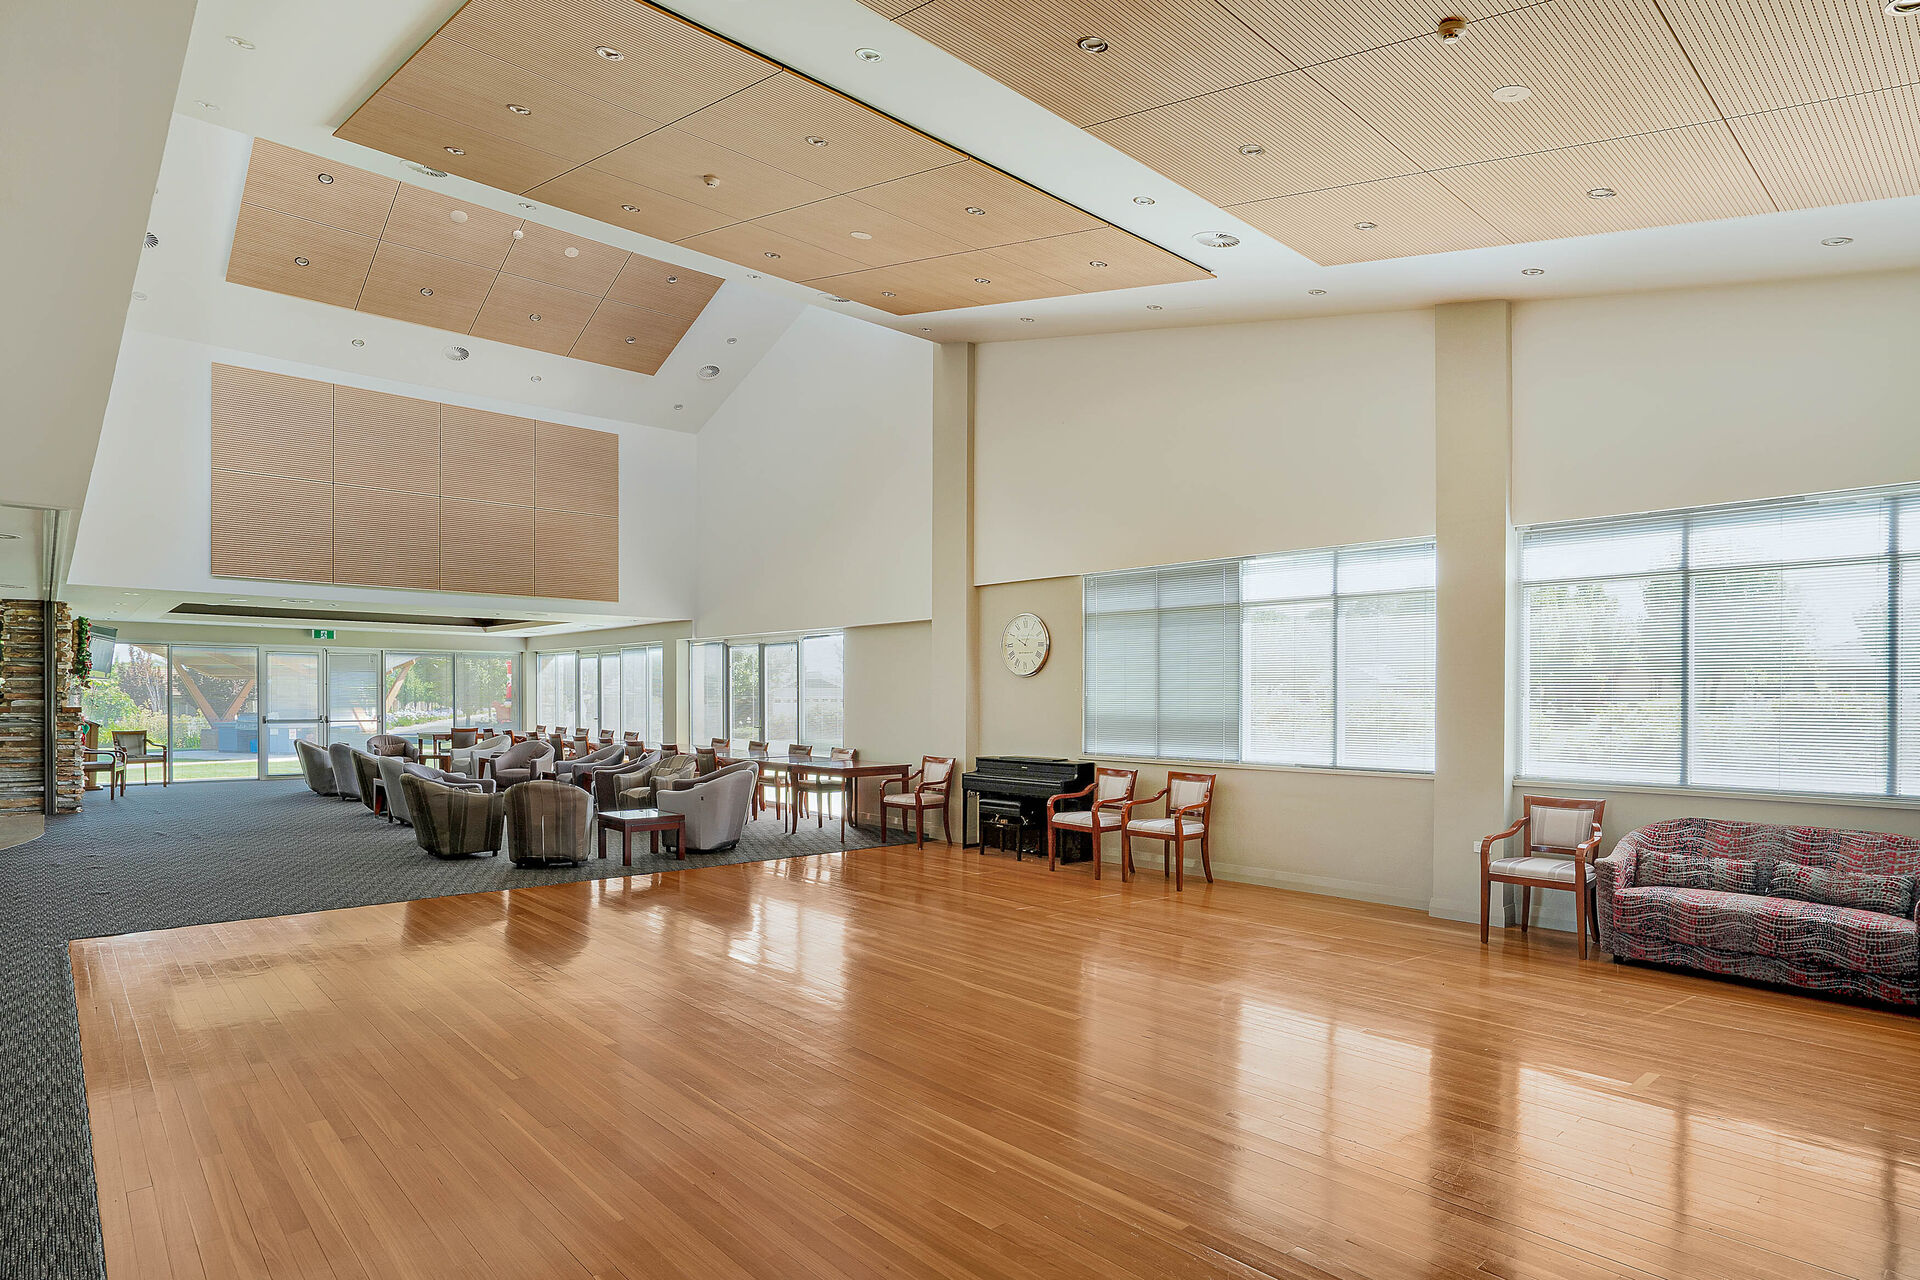 spacious interior of the community centre available for all residents at the over 55s grange retirement village in wagga wagga